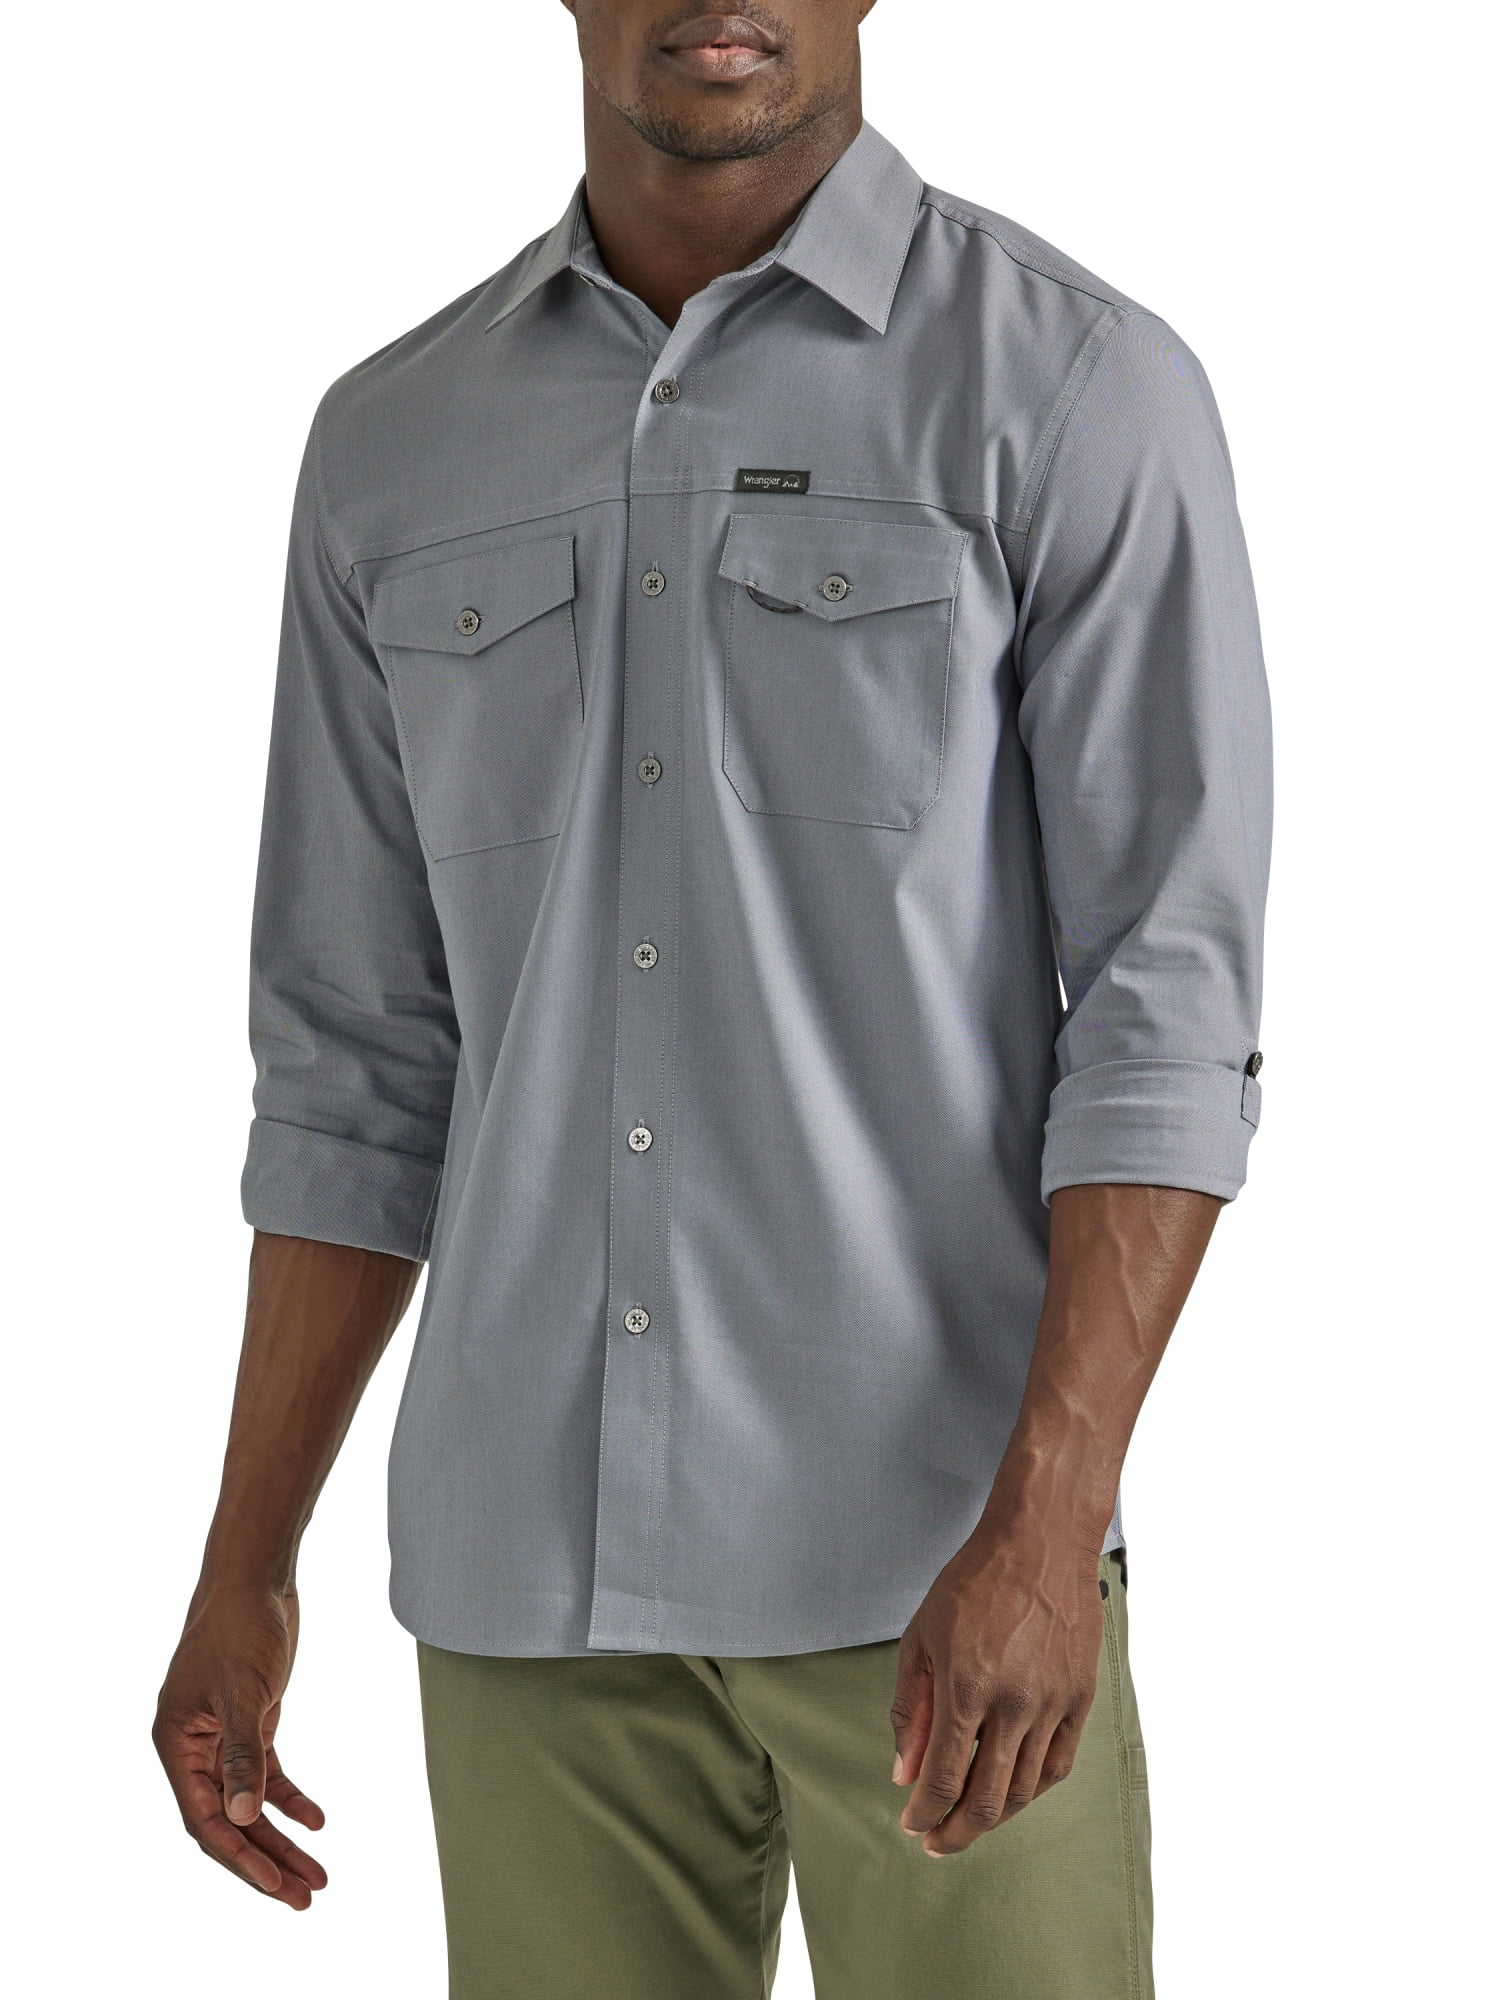 Wrangler Men's Outdoor Long Sleeve Shirt with UPF 30+ Protection - Laurel Wreath - S - XL Each